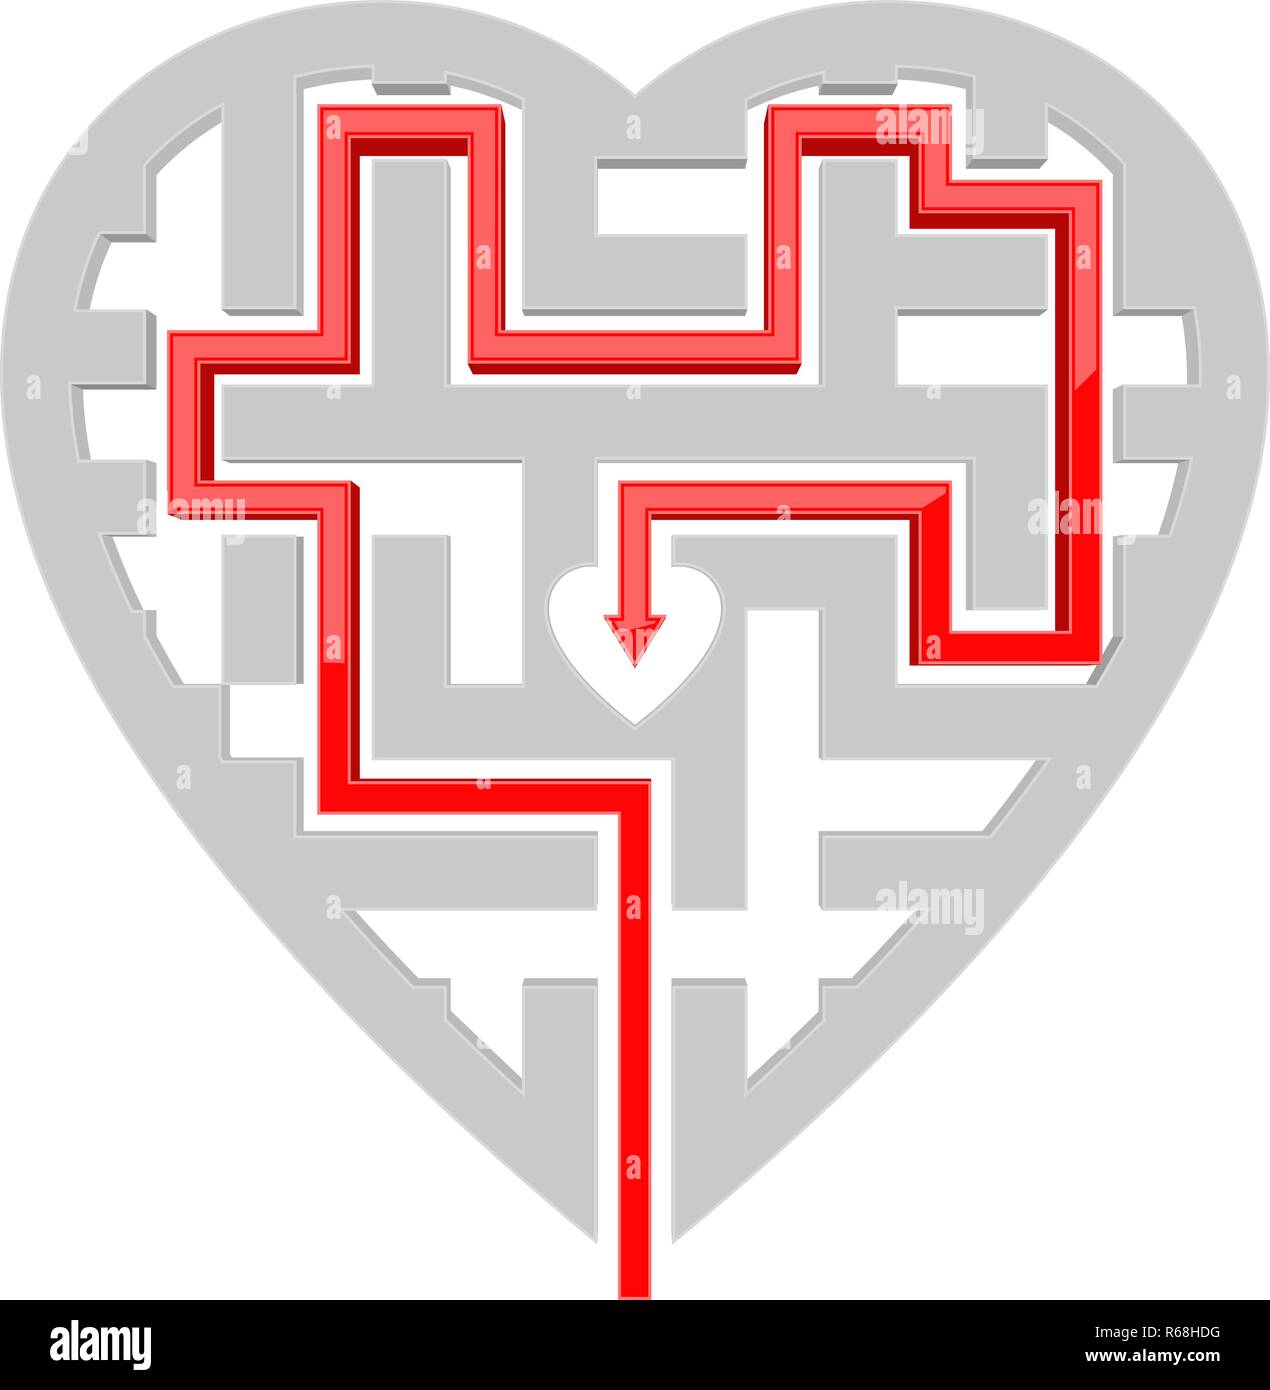 Heart shape maze with red path to center Stock Vector